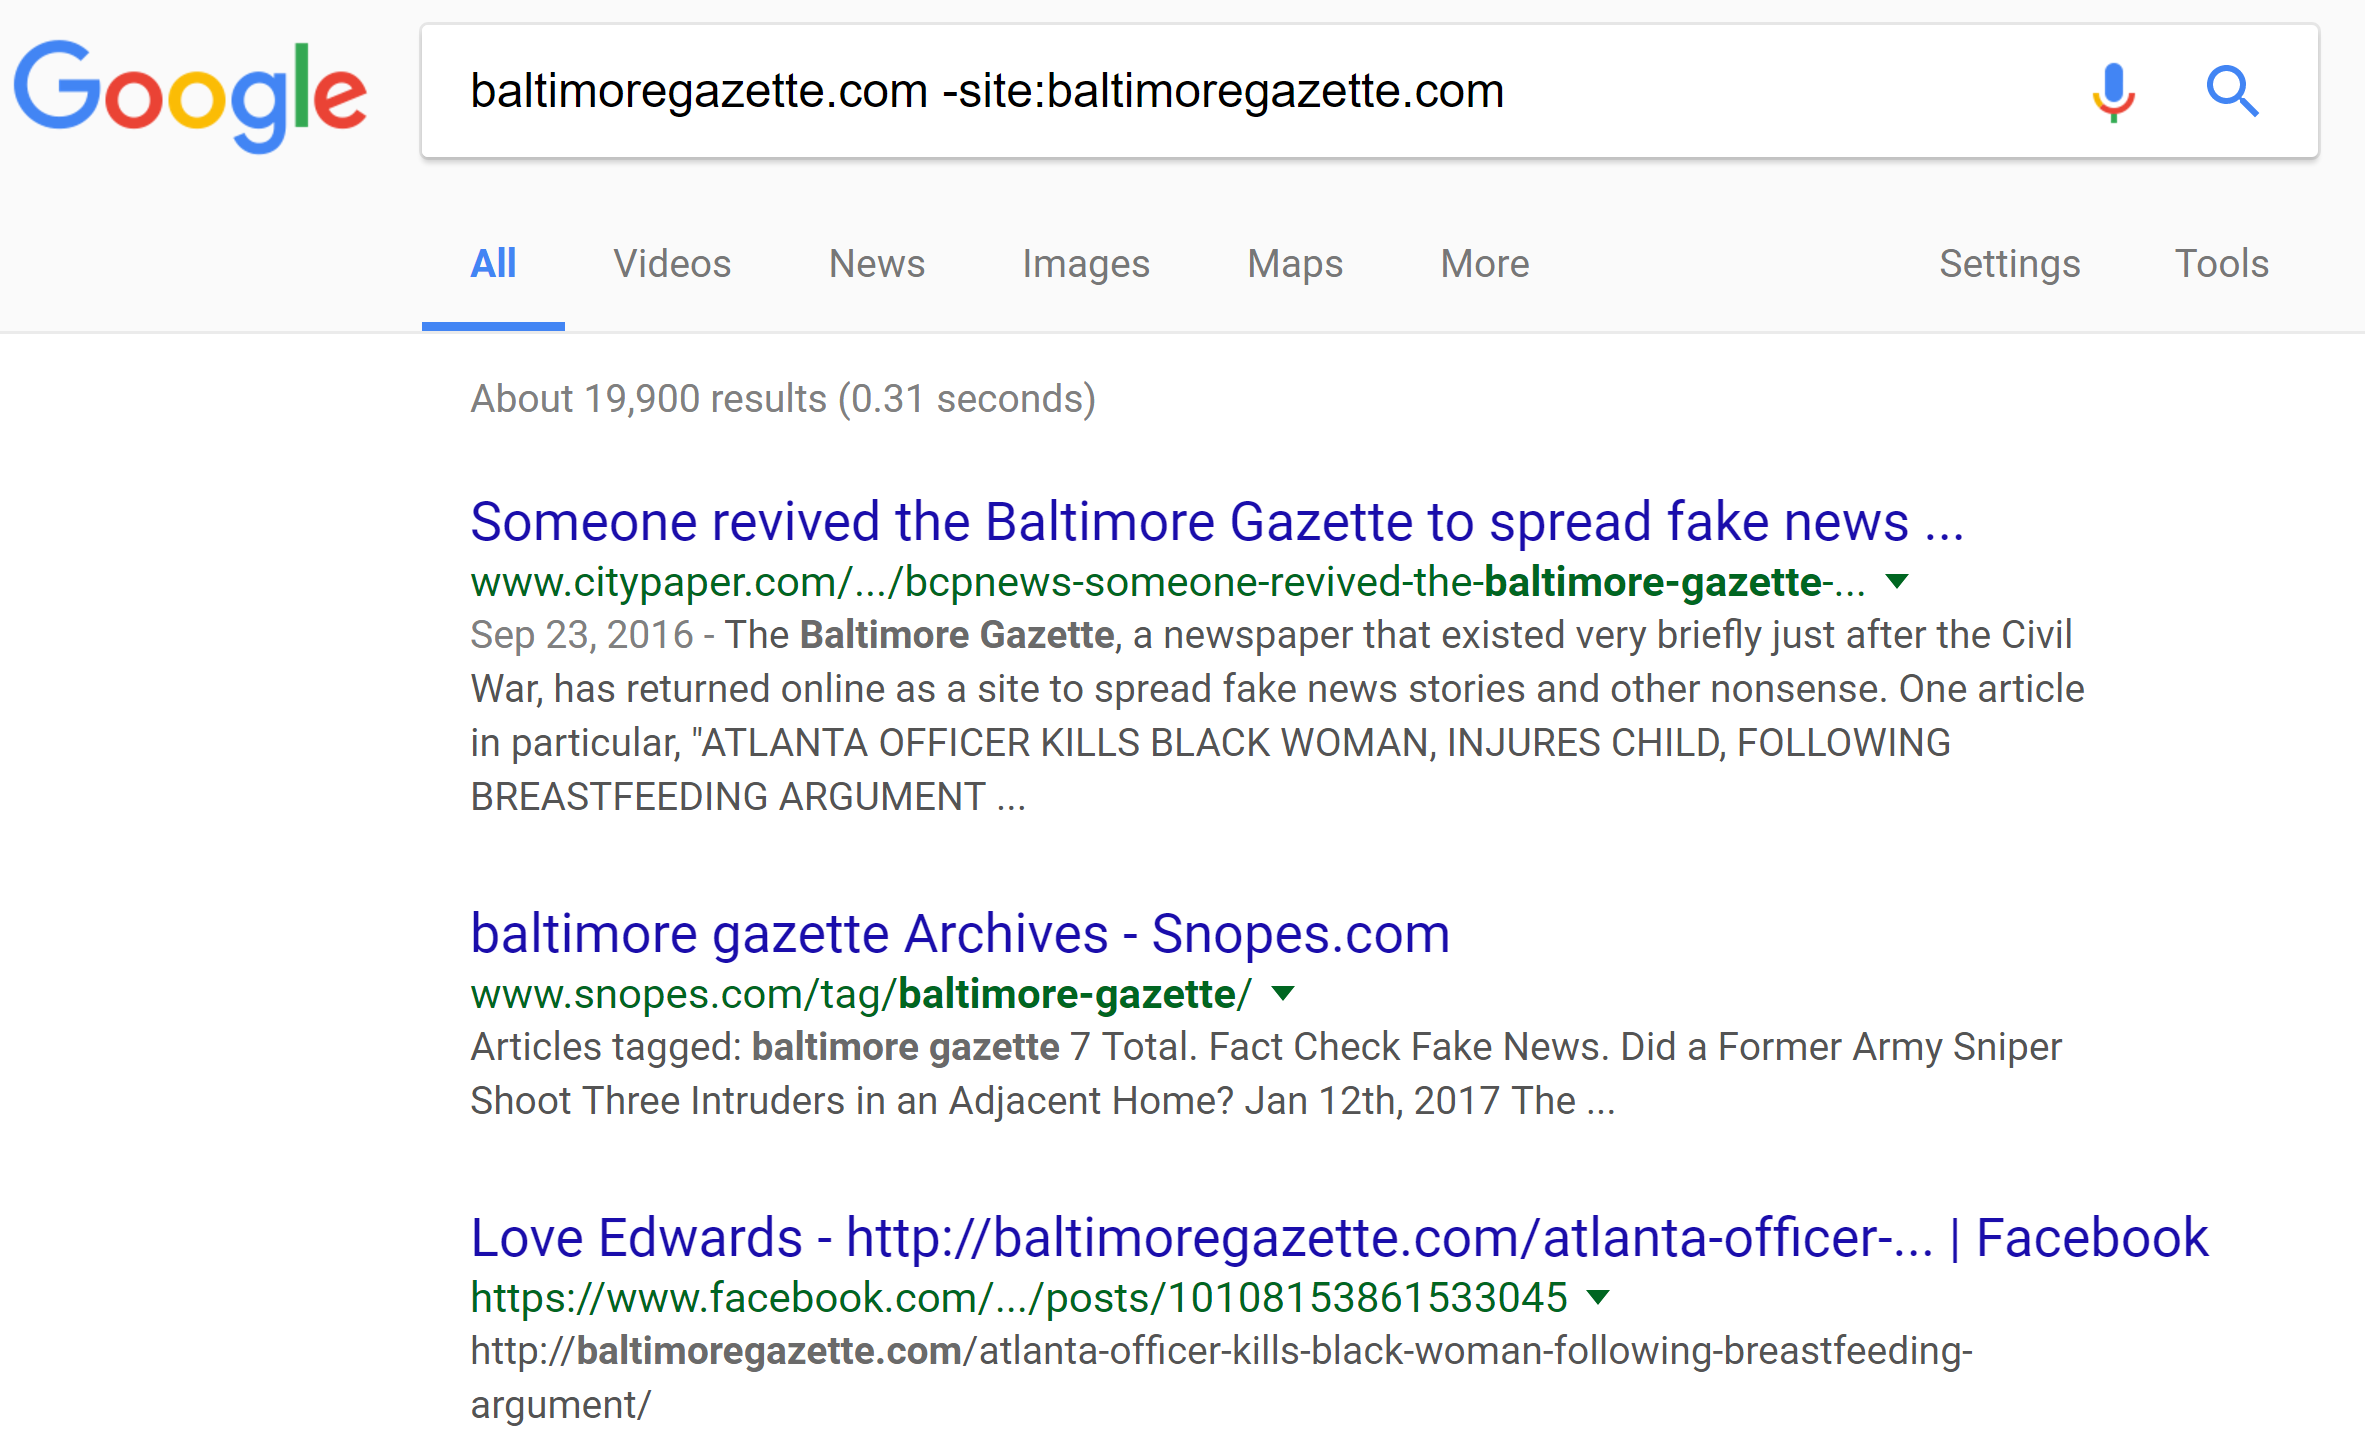 A Google search tip demonstrating how to exclude a specific site from search results. The string used in the example is "baltimoregazette.com -site:baltimoregazette.com". This would search all sites except for "baltimoregazette.com."